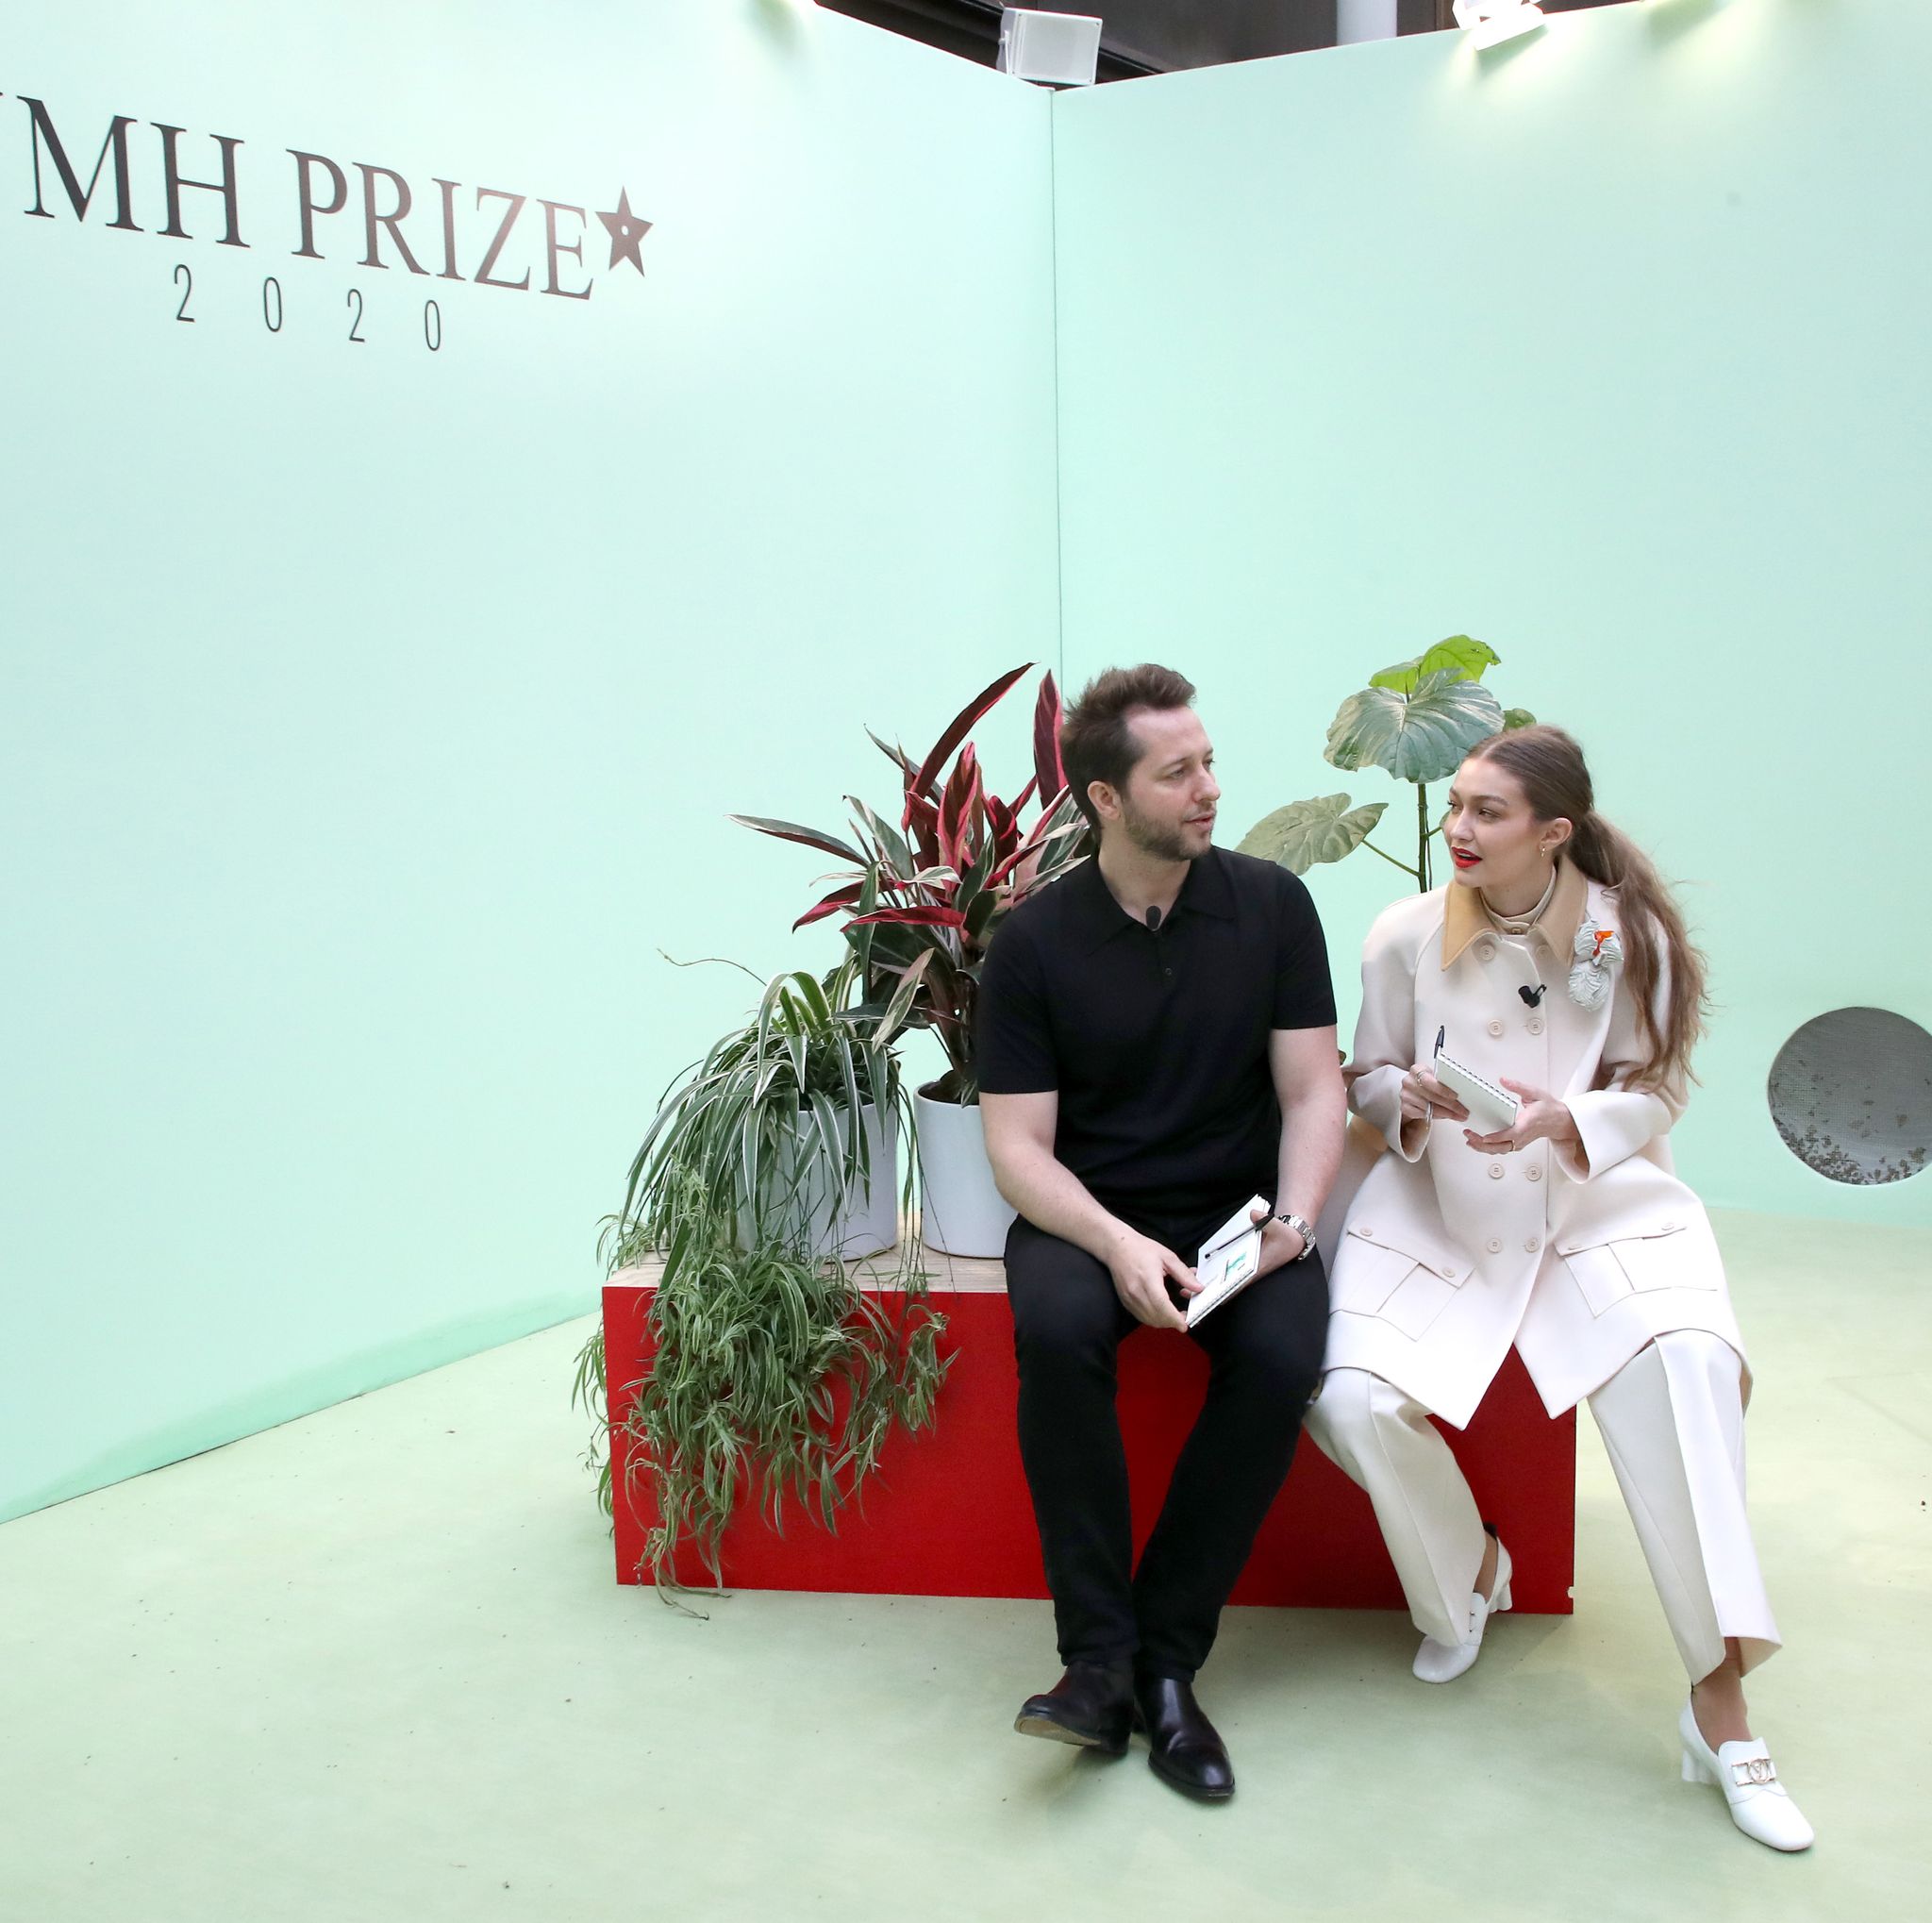 The LVMH Prize 2020 has cancelled its final and sets up a Fund in